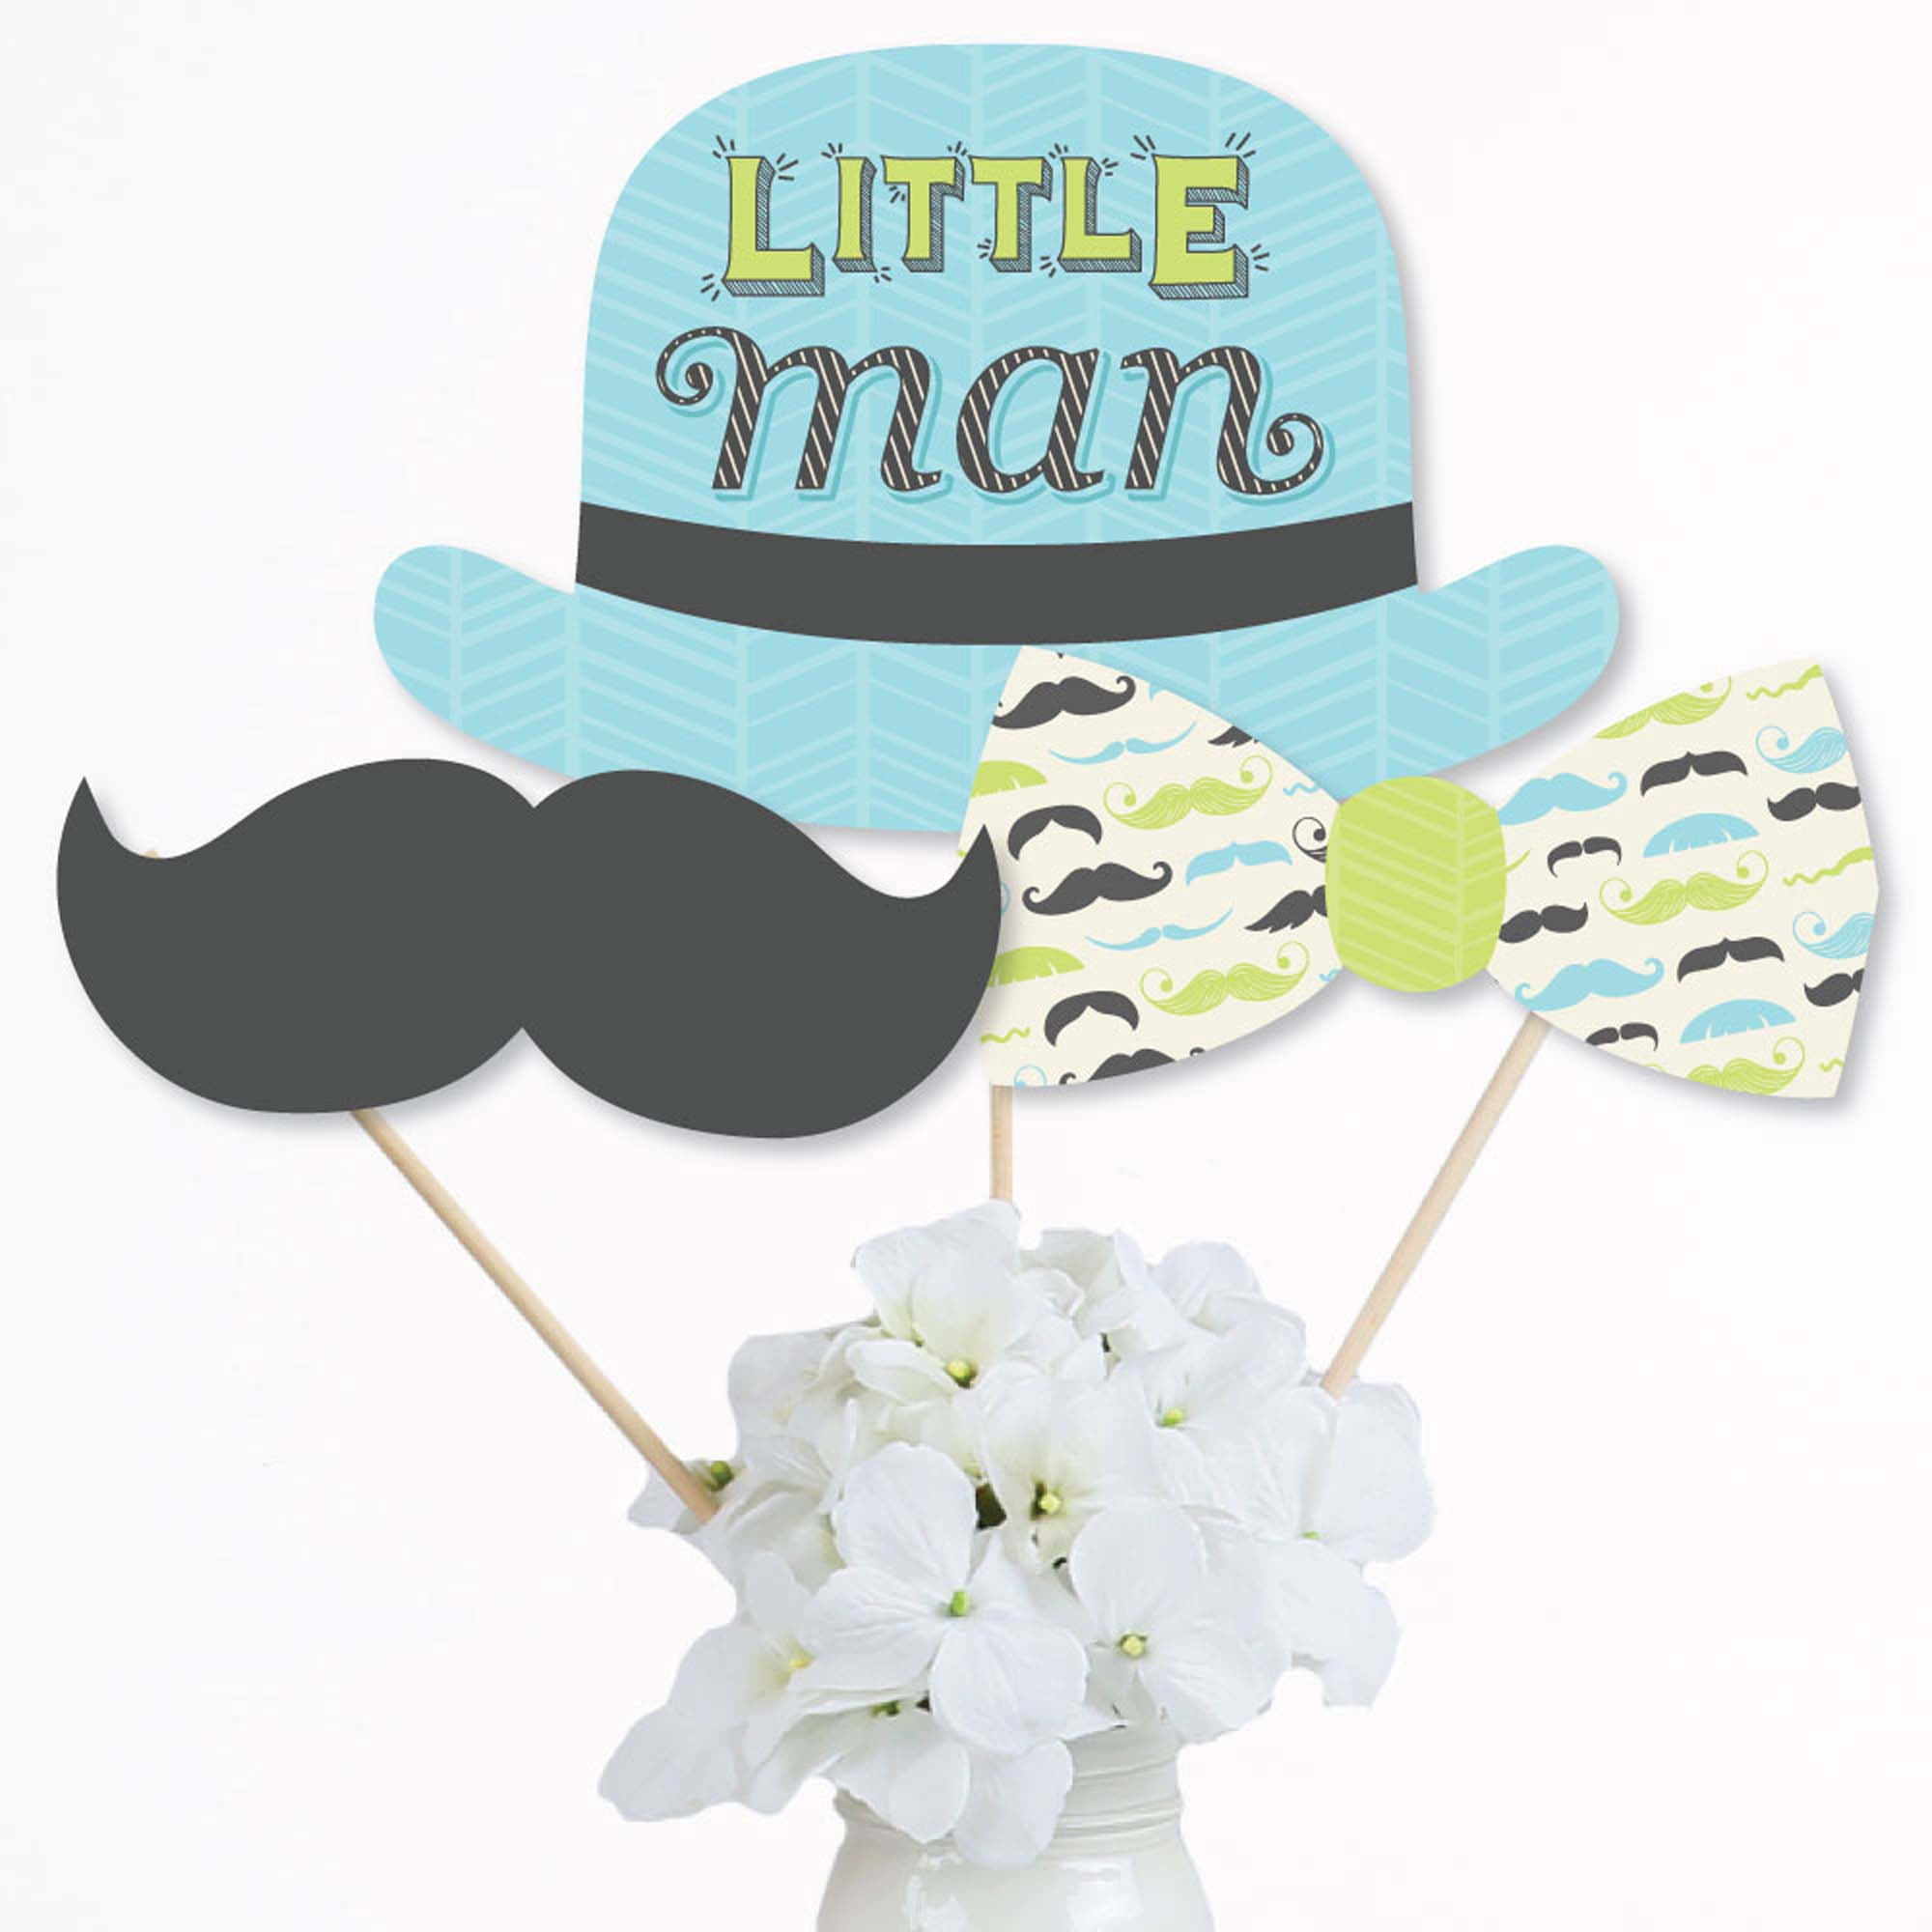 Any Color, Baby Boy Mustache, Handmade Scrapbook Page Set, Little Man  Stache, Custom Premade Kit, Personlized Memory Book, Baby Shower Gift